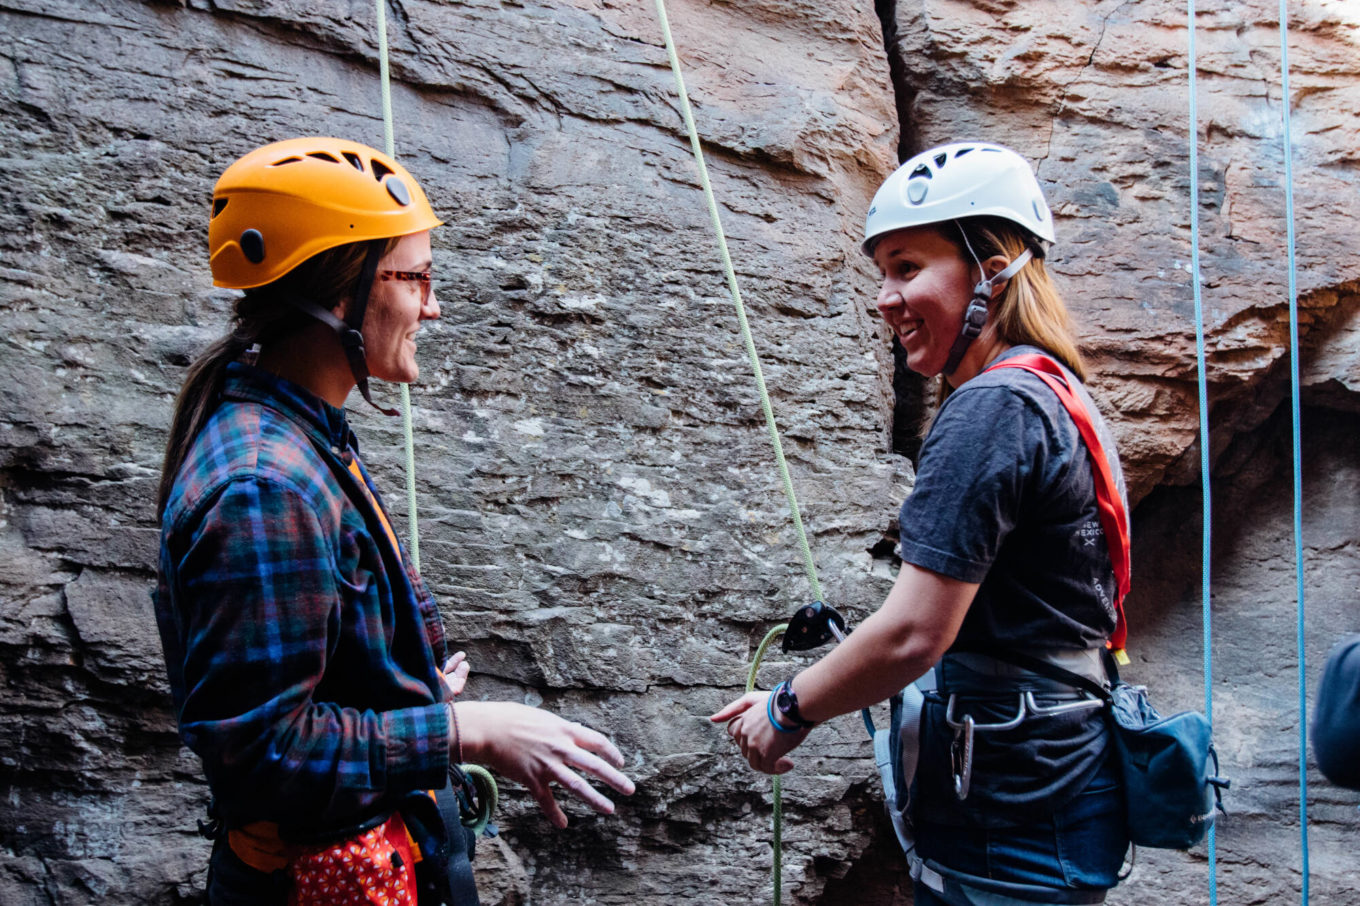 Rock climbing and river rafting trip in new mexico